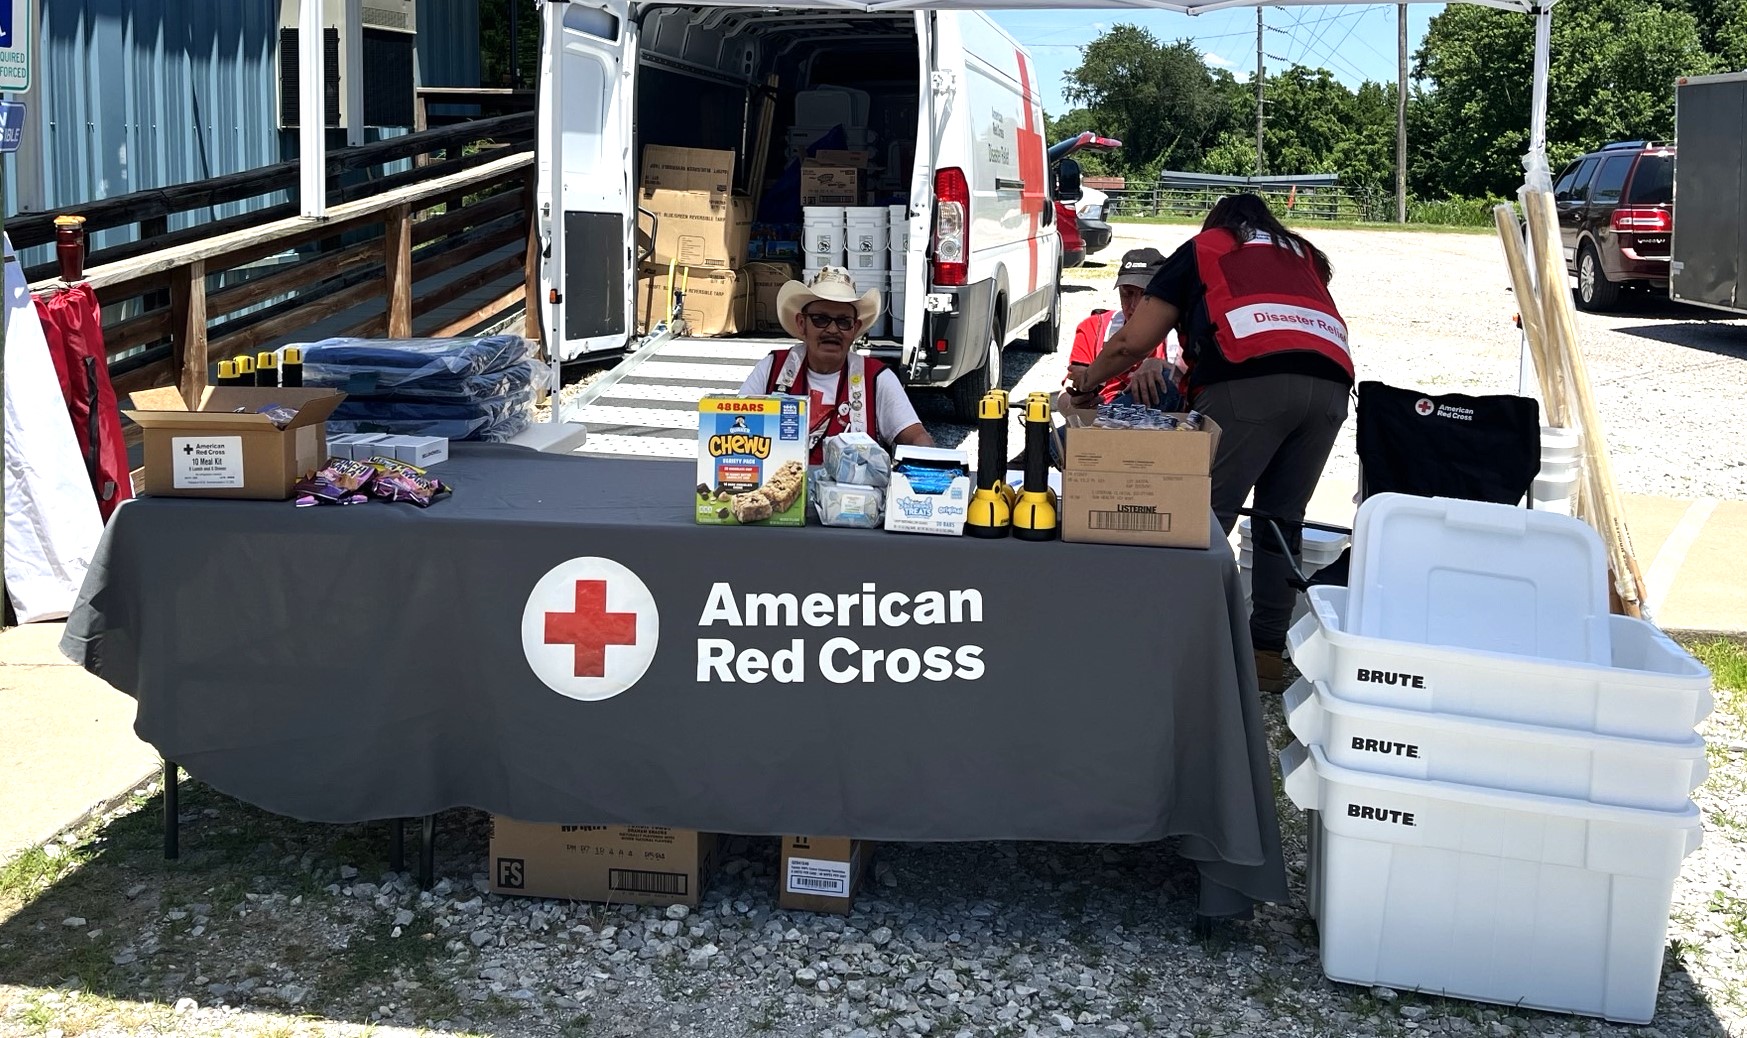 Volunteers with the American Red Cross distribute supplies to residents of Decatur, Arkansas following the tornado that hit over the Memorial Day weekend.